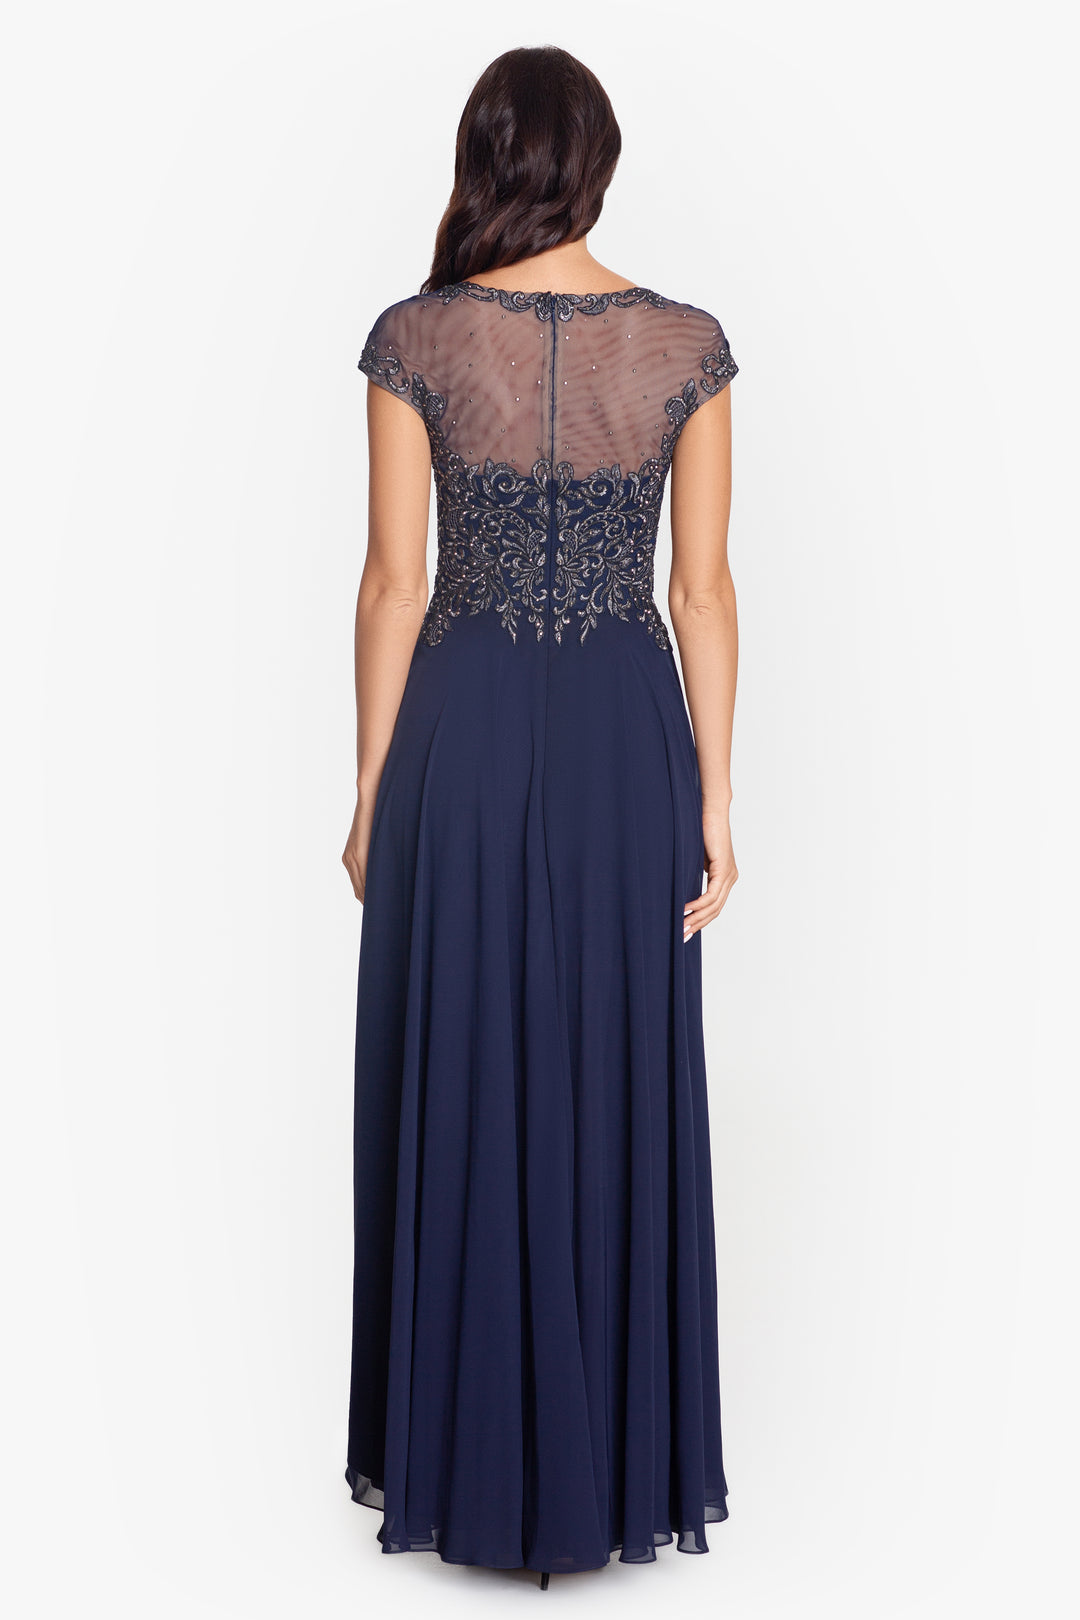 "Bianca" Full Length Embroidered Chiffon Gown